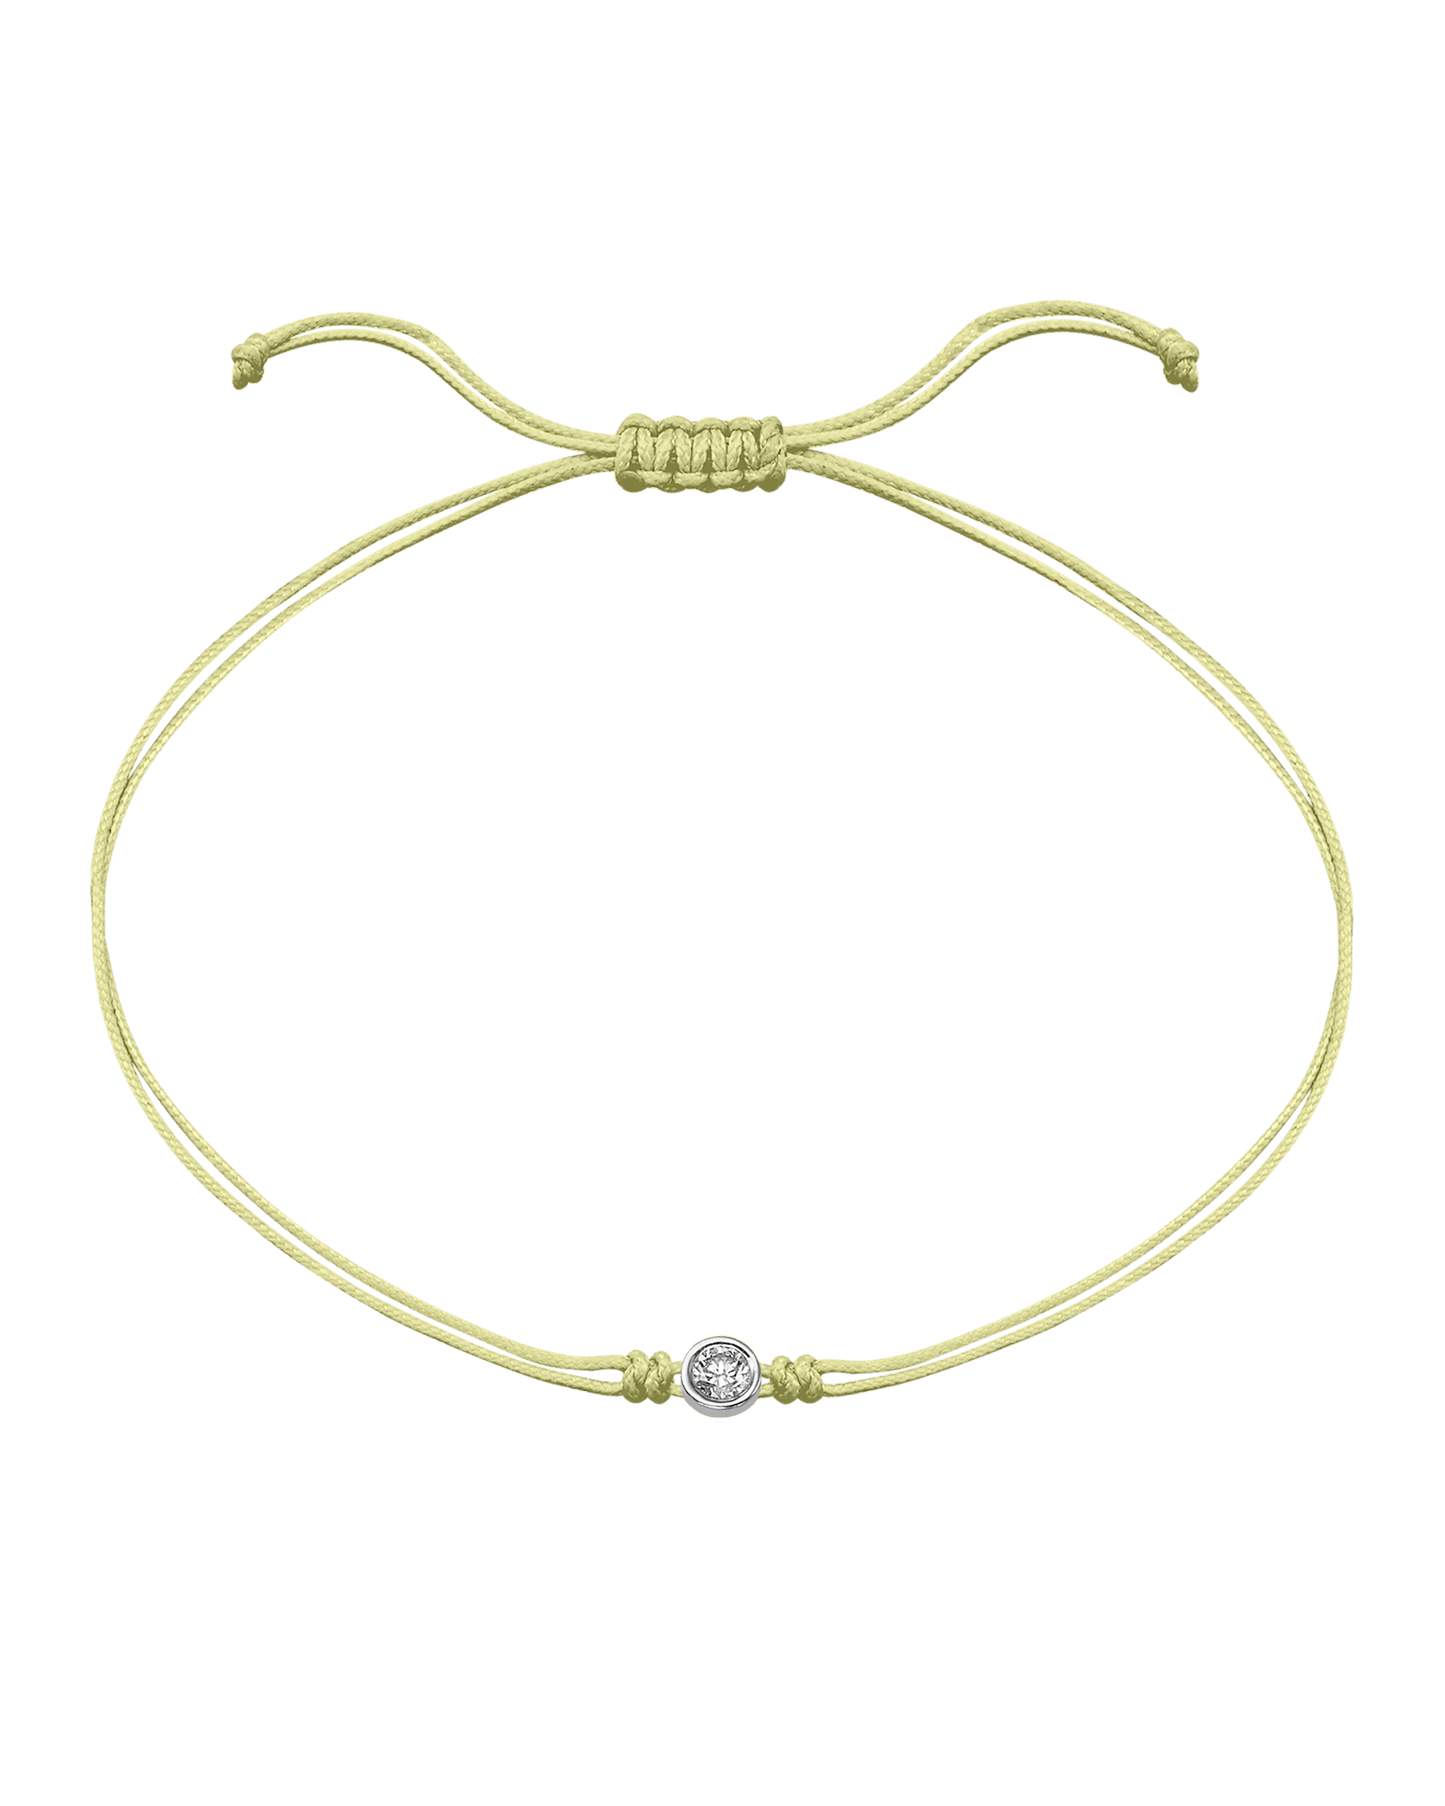 Summer Edition : The Classic String of Love - 14K White Gold Bracelets magal-dev Tropical Cosmopolitan - Light Yellow Large: 0.10ct 